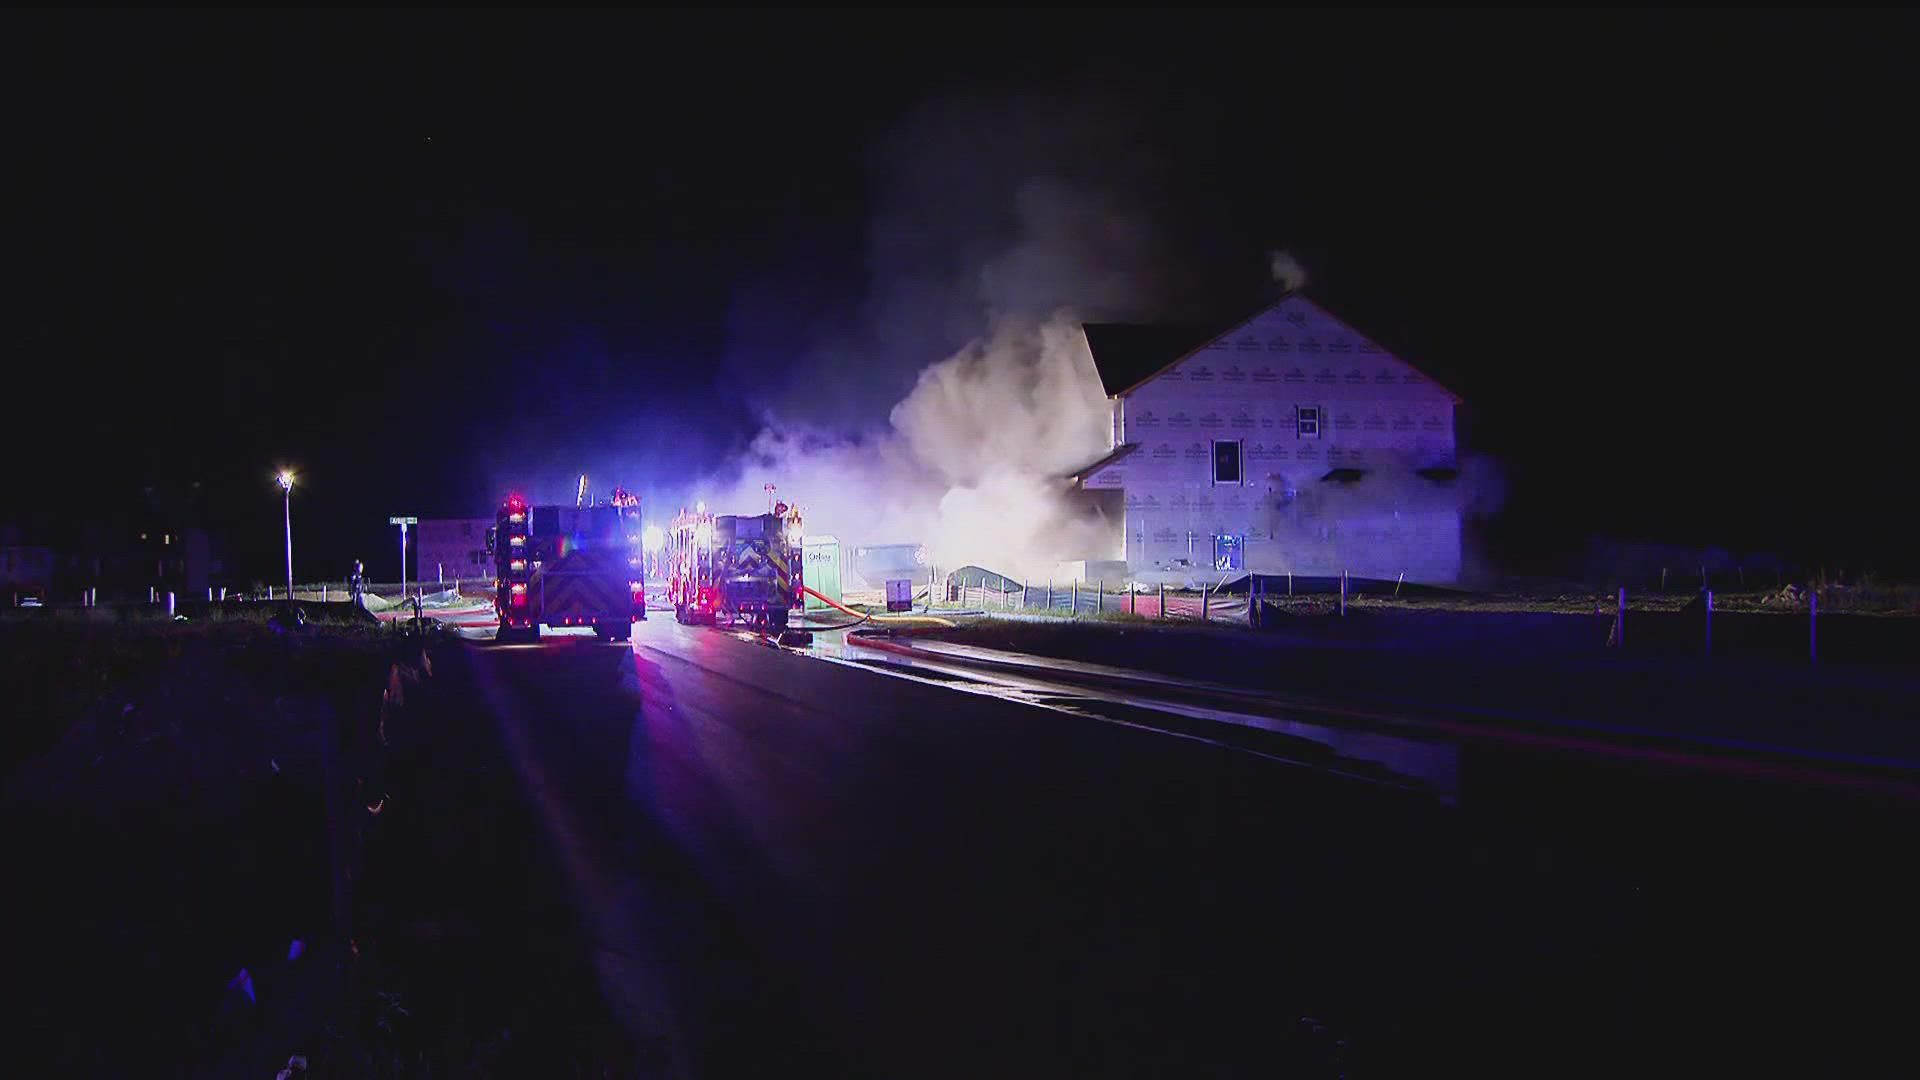 A family was forced out of their home after a fire on Tuesday night.